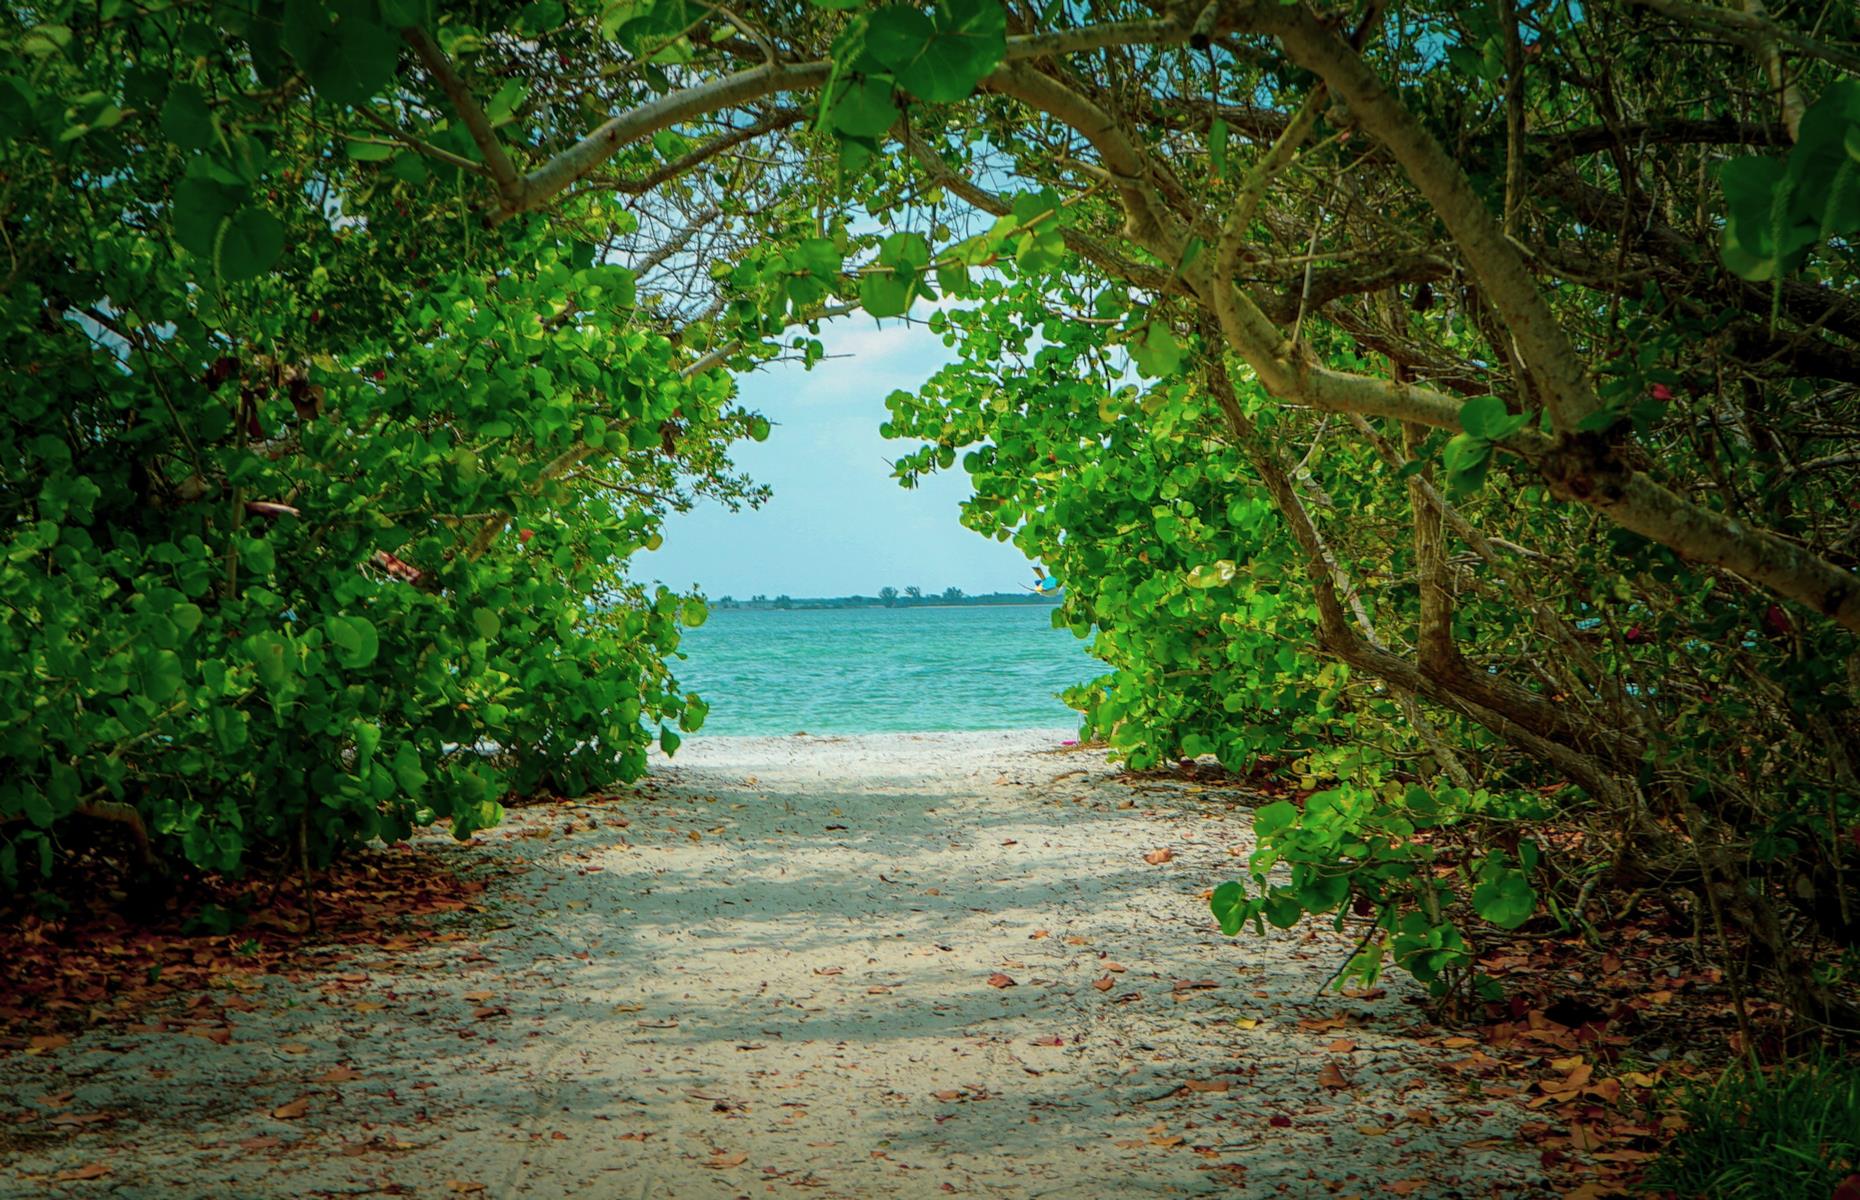 <p><a href="https://www.weather-us.com/en/florida-usa/sanibel-climate">Temperatures up to 70°F (21°C)</a> in January and 82°F (28°C) in October are enough to recommend Sanibel Island for an off-season trip. The relative lack of crowds packing out the pale sandy beaches is another. Then, of course, there’s the beauty, which remains striking all year round. Sanibel and neighboring Captiva are hugely popular in summer, when people come to soak up the sunshine while collecting pretty shells from the sand. Once they leave, prices drop – and the sun continues to shine.</p>